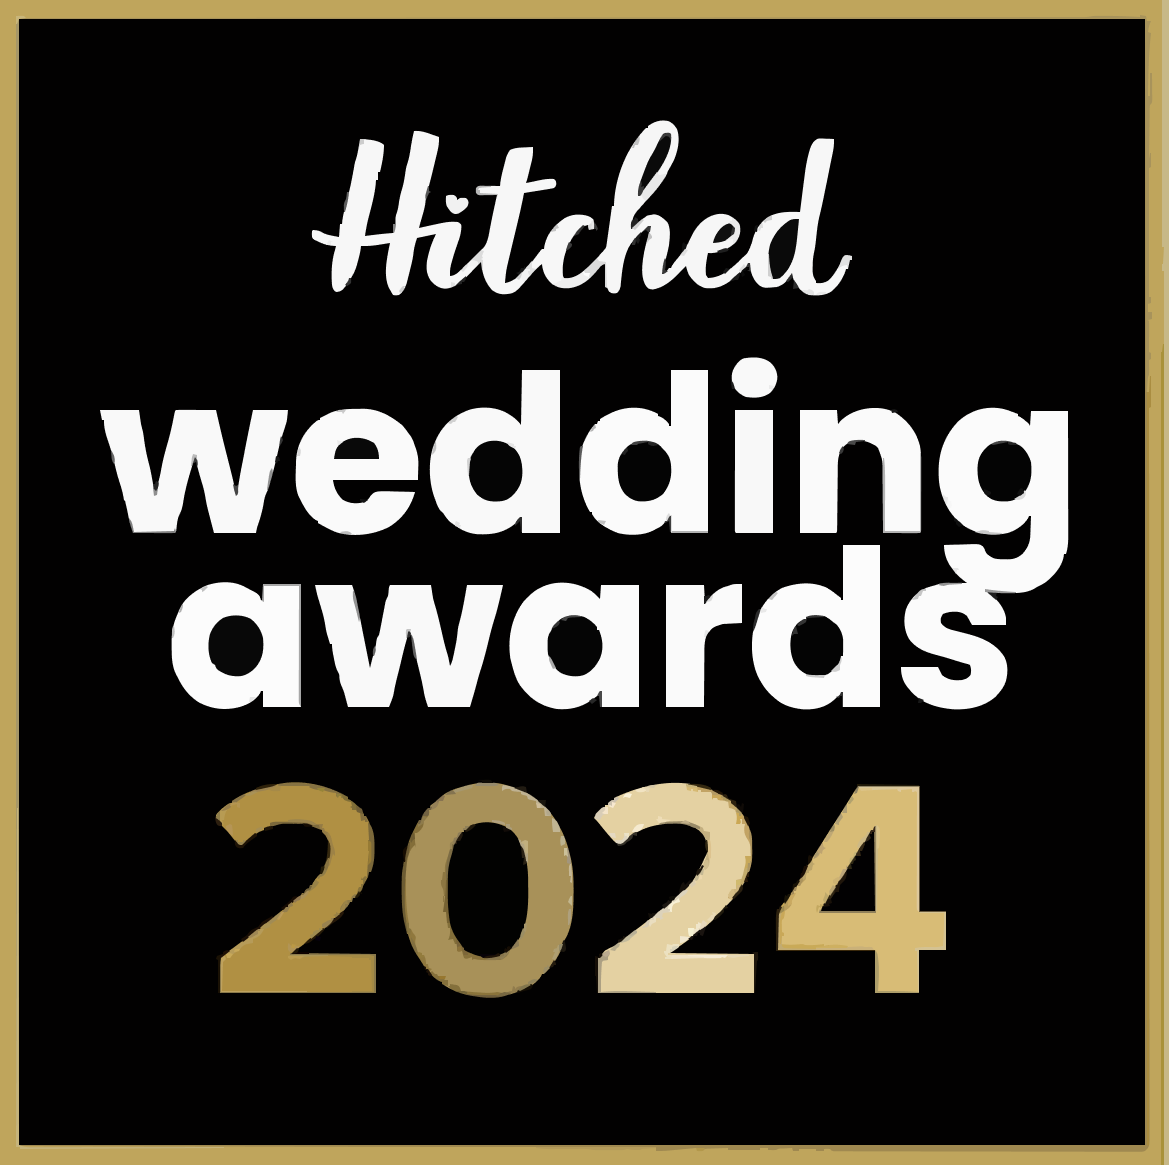 The Ched Wedding Awards